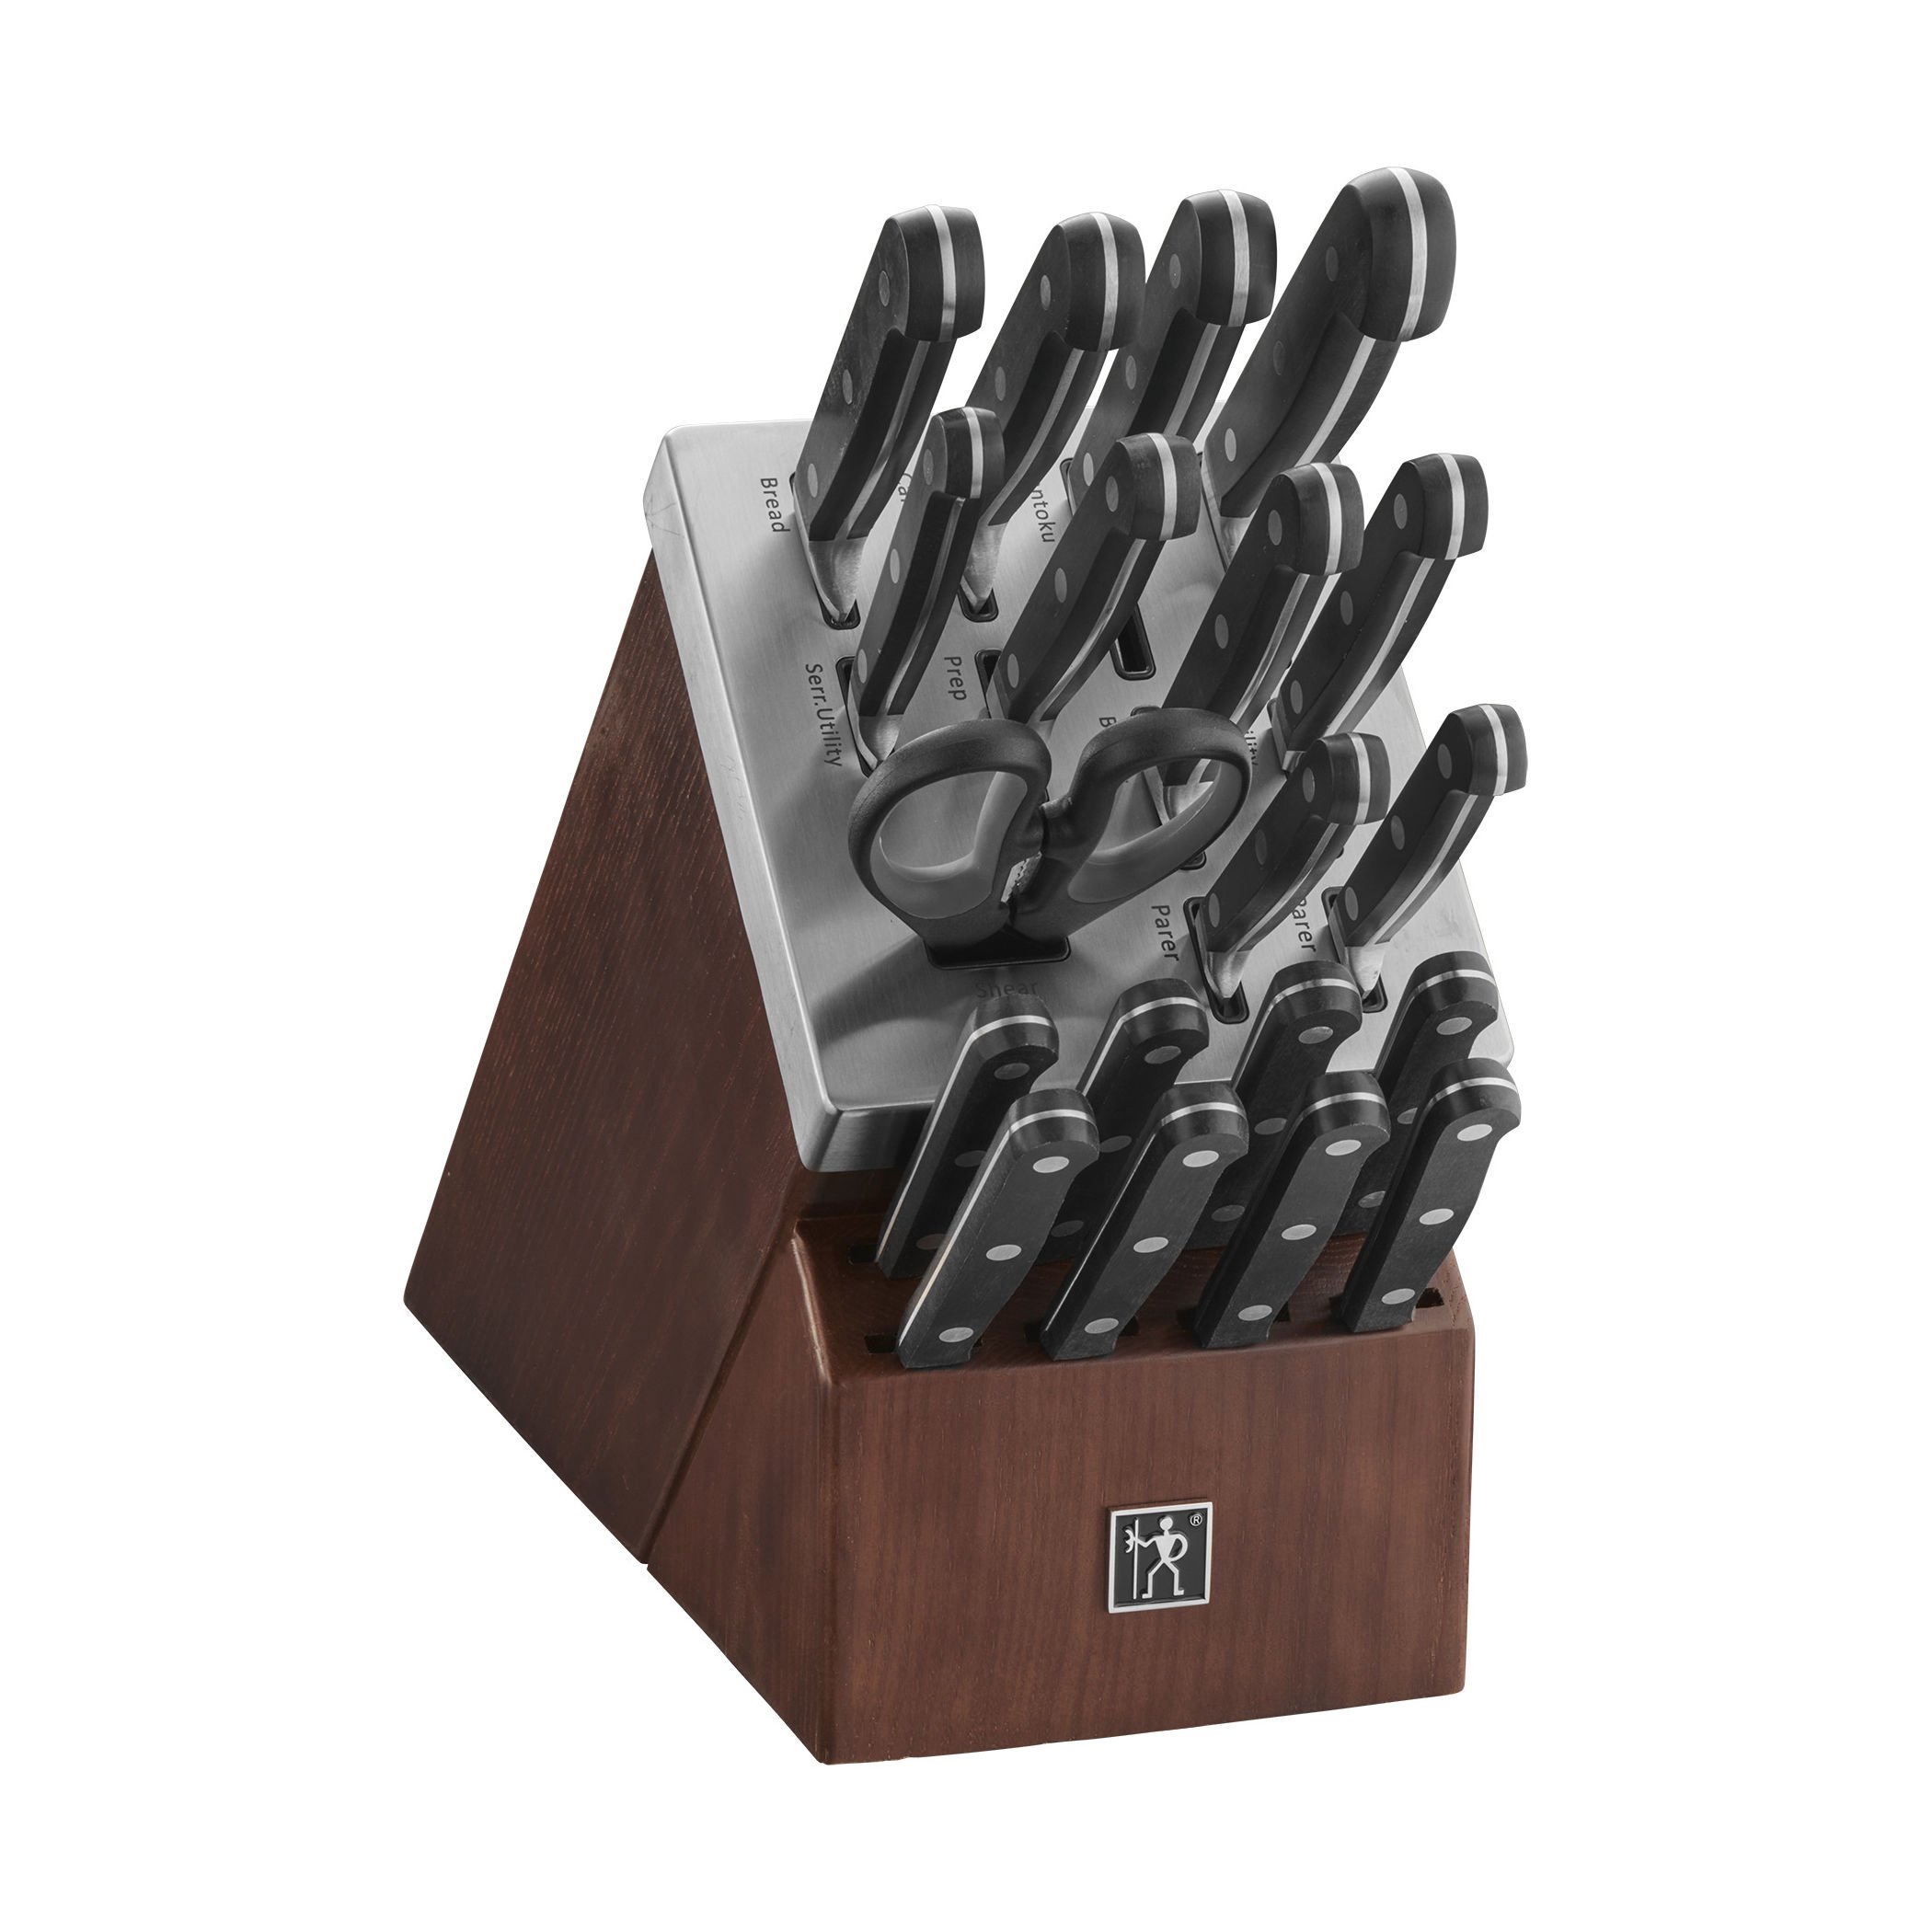 Chicago Cutlery Essentials Parer, Serrated Utility & Chef Knives - 3 knives